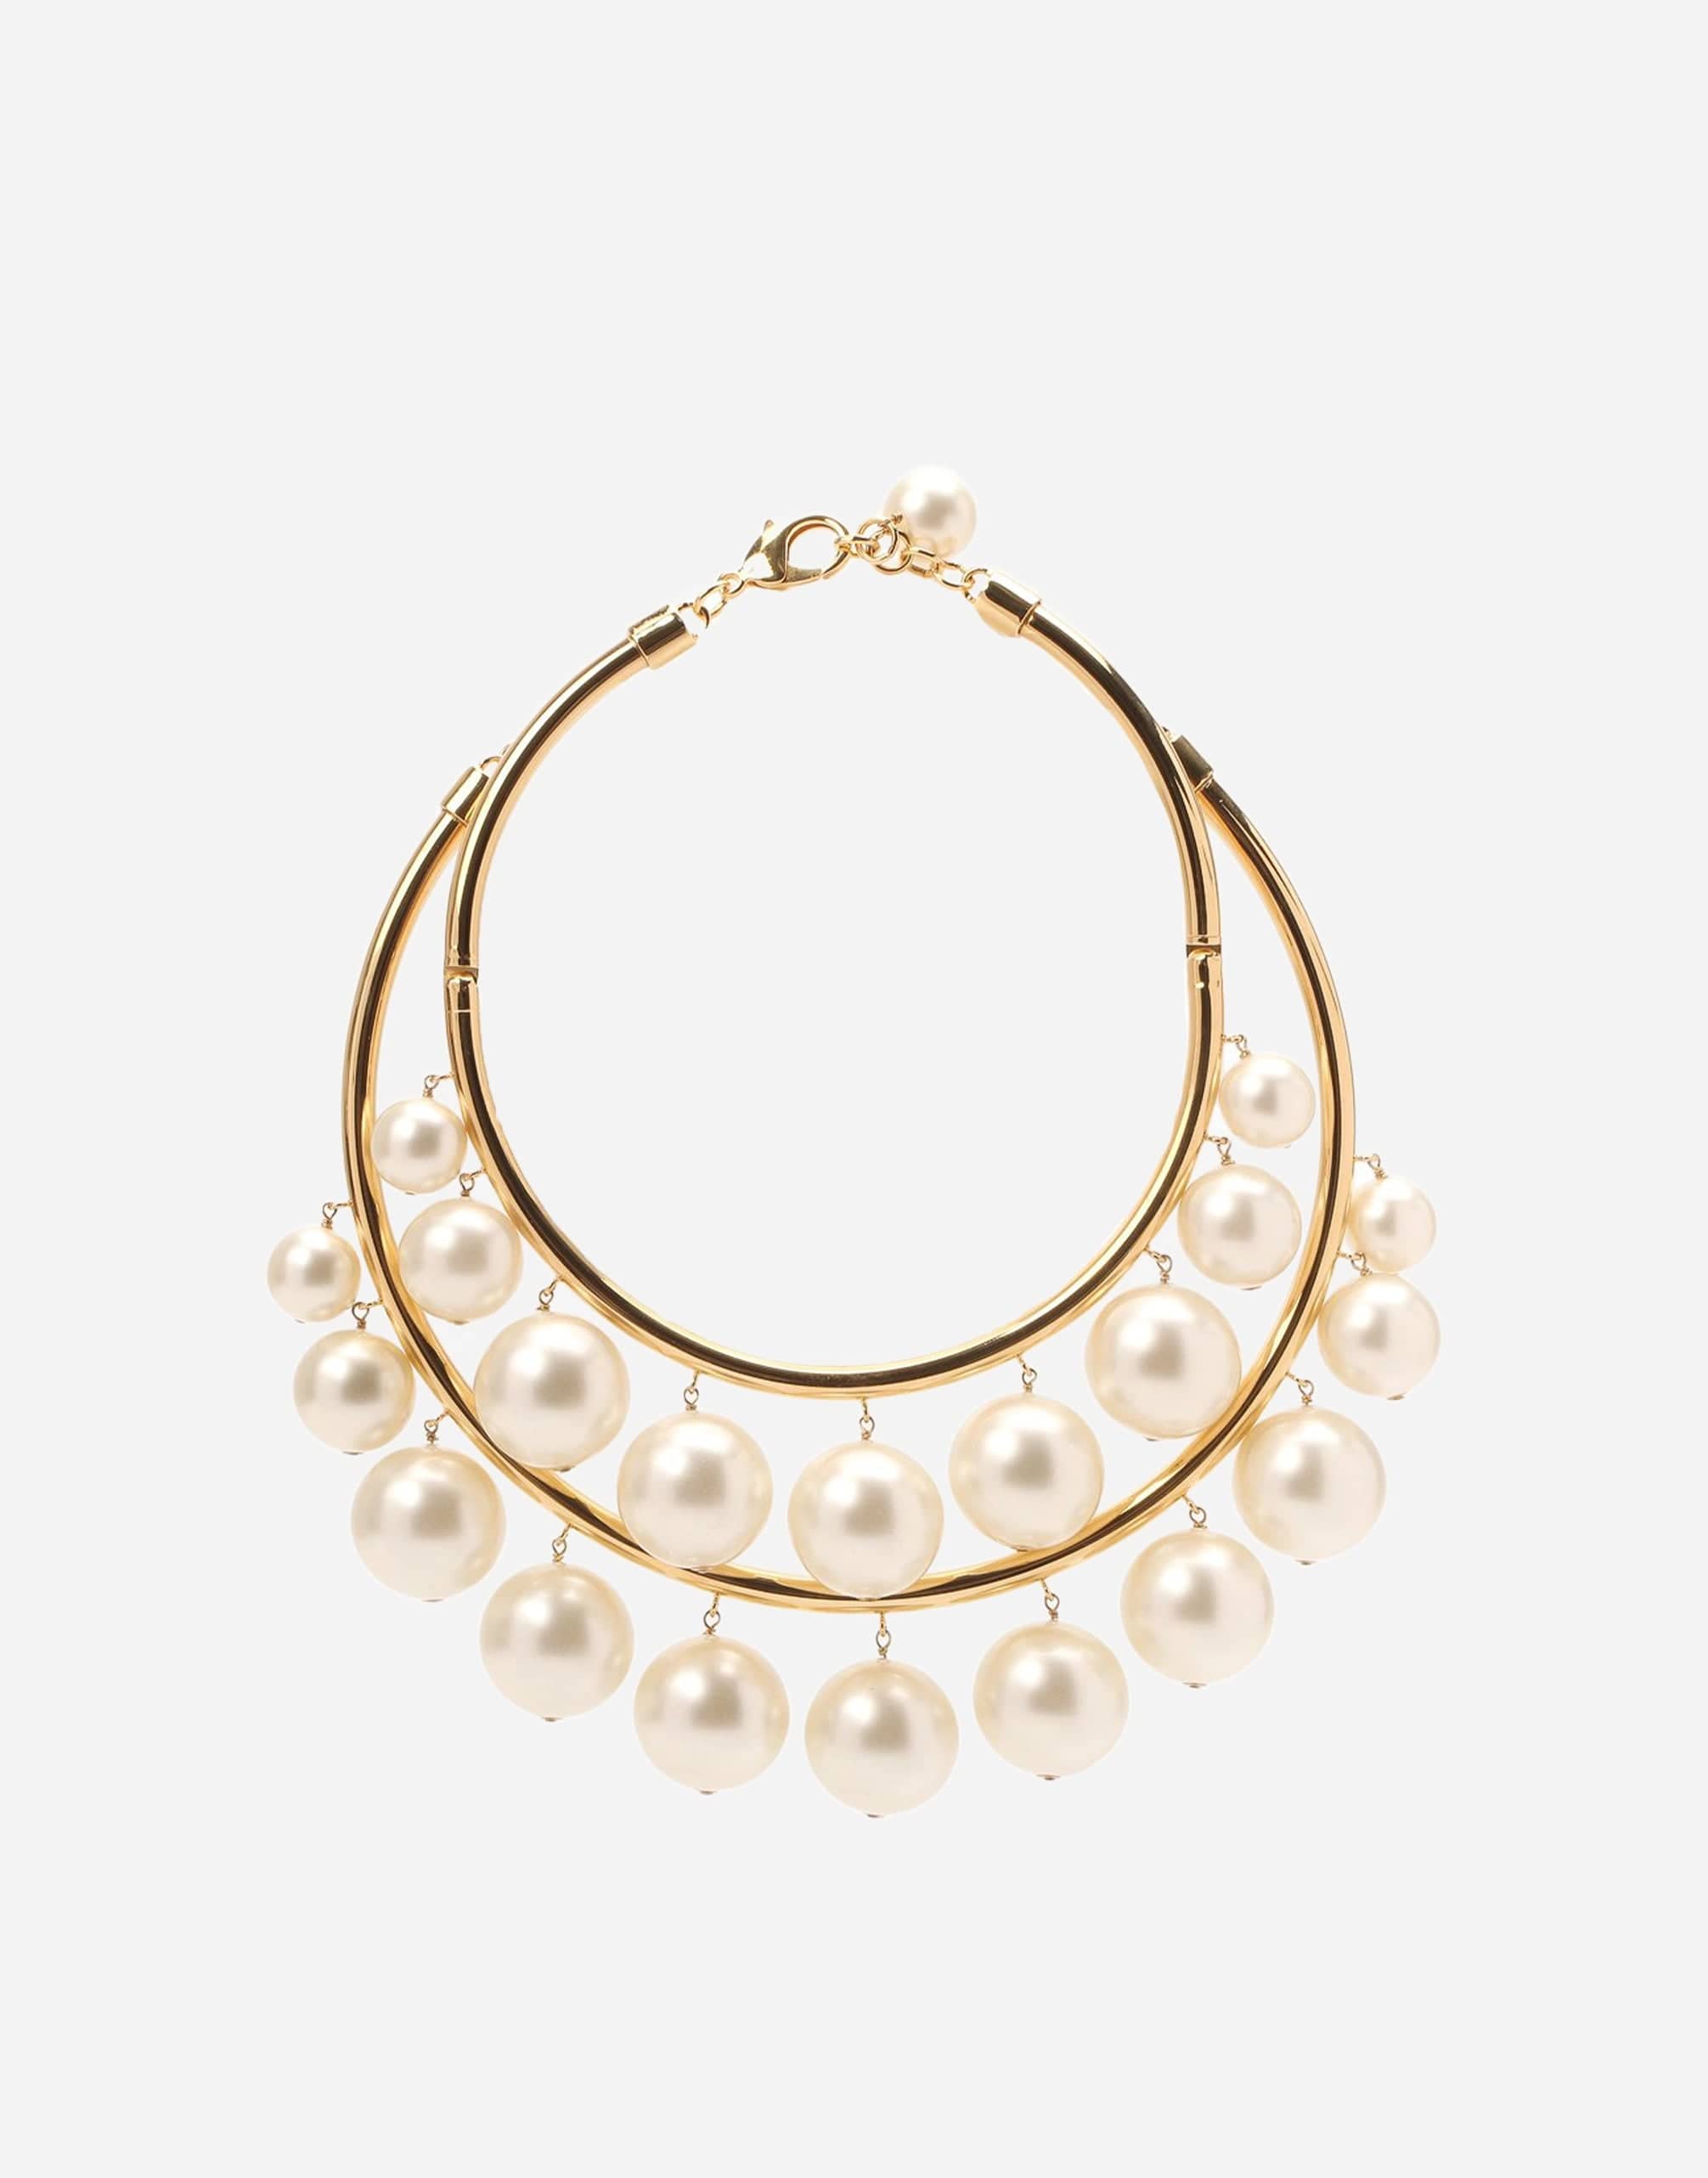 Dolce & Gabbana Faux Pearl-Embellished Choker Necklace